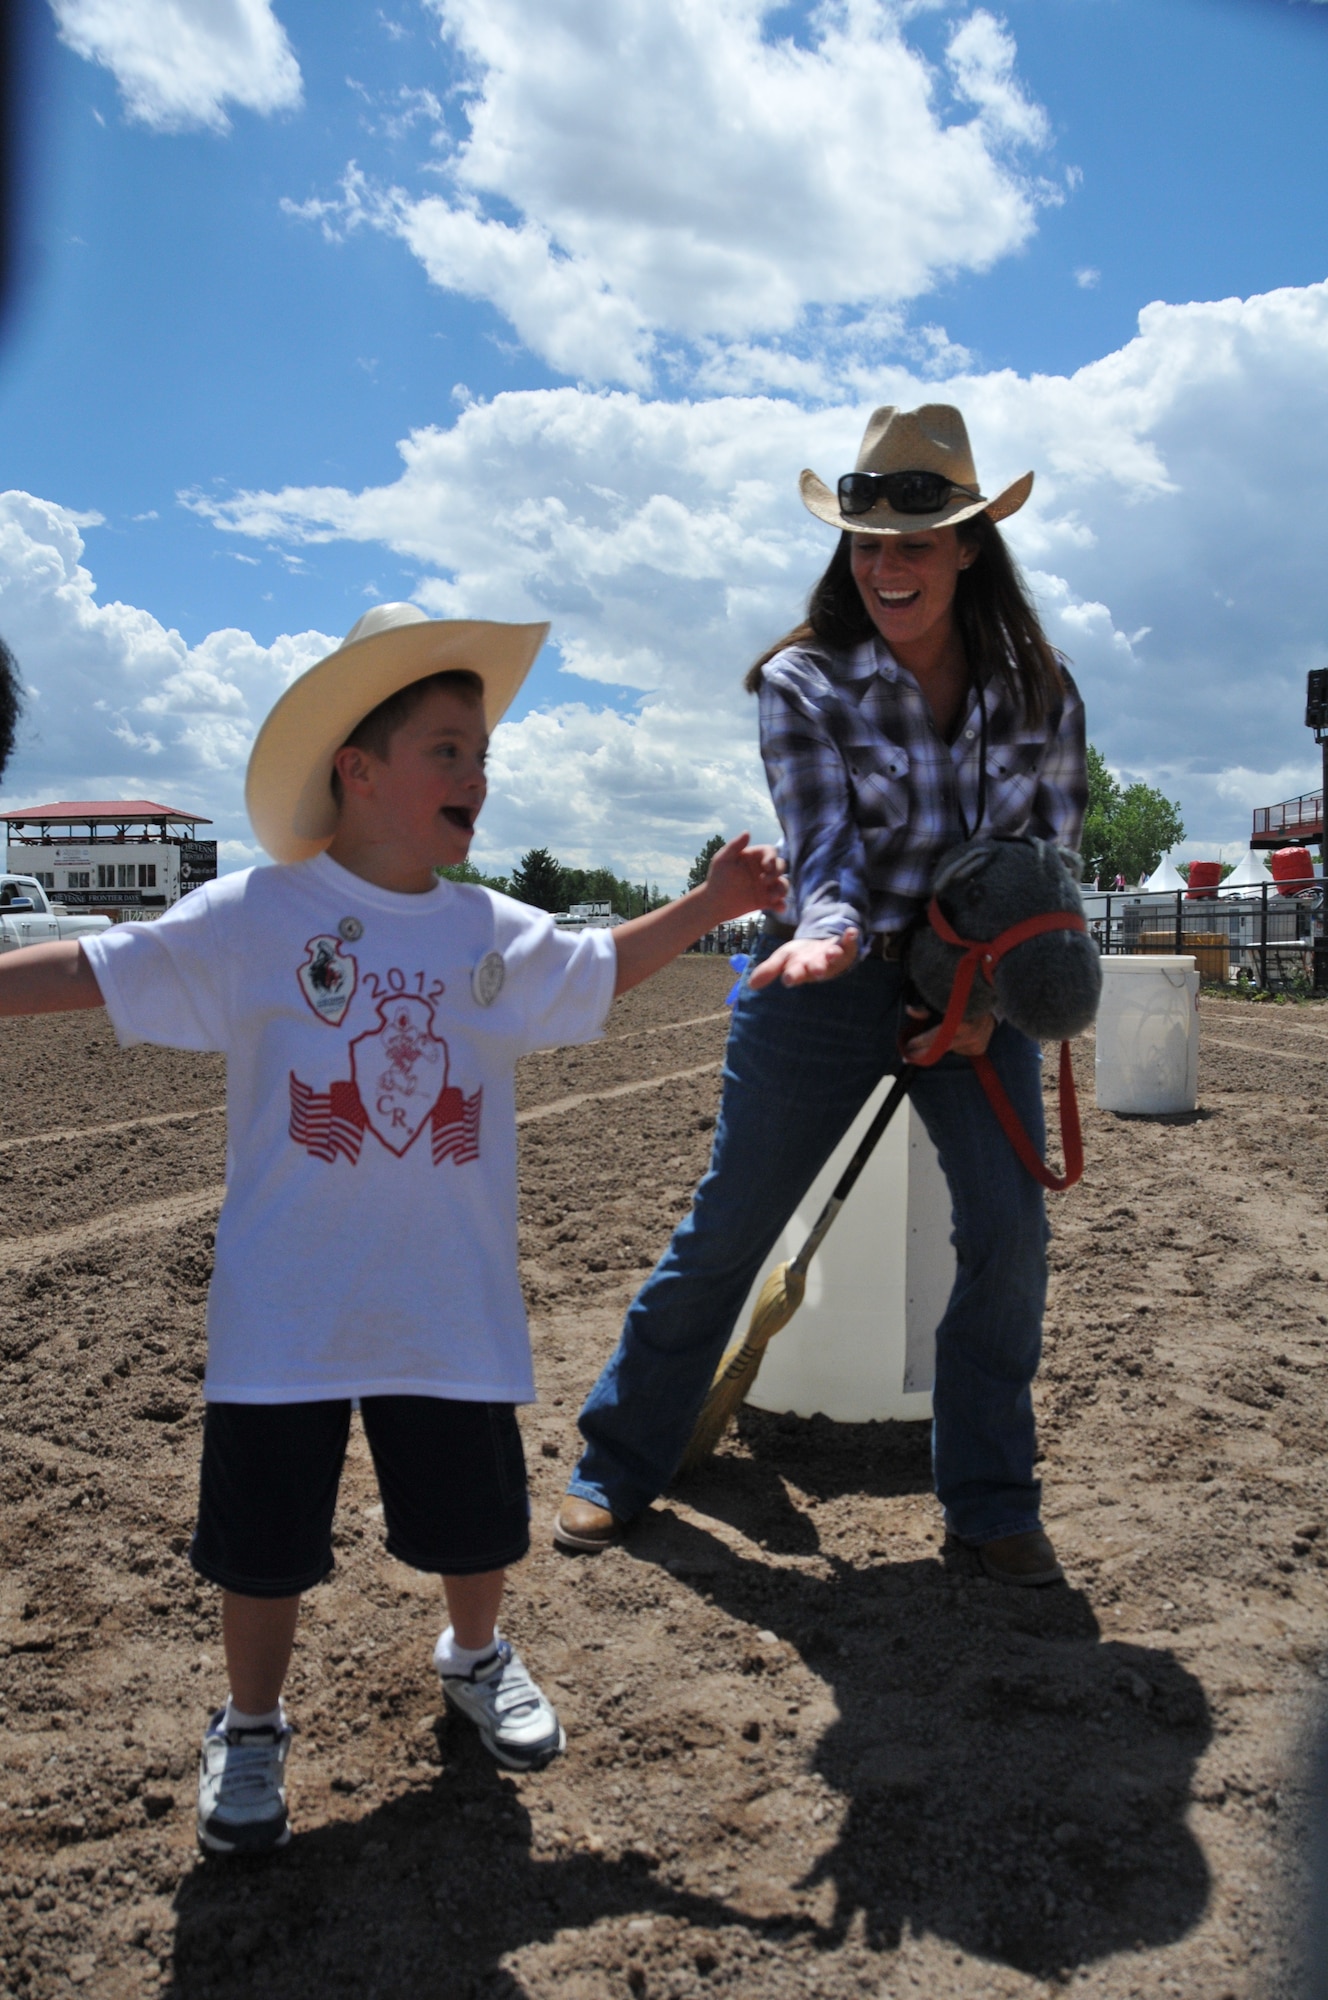 Staff Sgt. Heidi Valdez, 153rd Medical Group health technician, cheers for Ashton, a contestant at The Challenge Rodeo at Cheyenne Frontier Days, July 25, 2012. Valdez volunteered for the first year as a cowboy medic assisting rodeo contestants with injuries. (U.S. Air Force photo by 1st Lt. Rusty Ridley)


